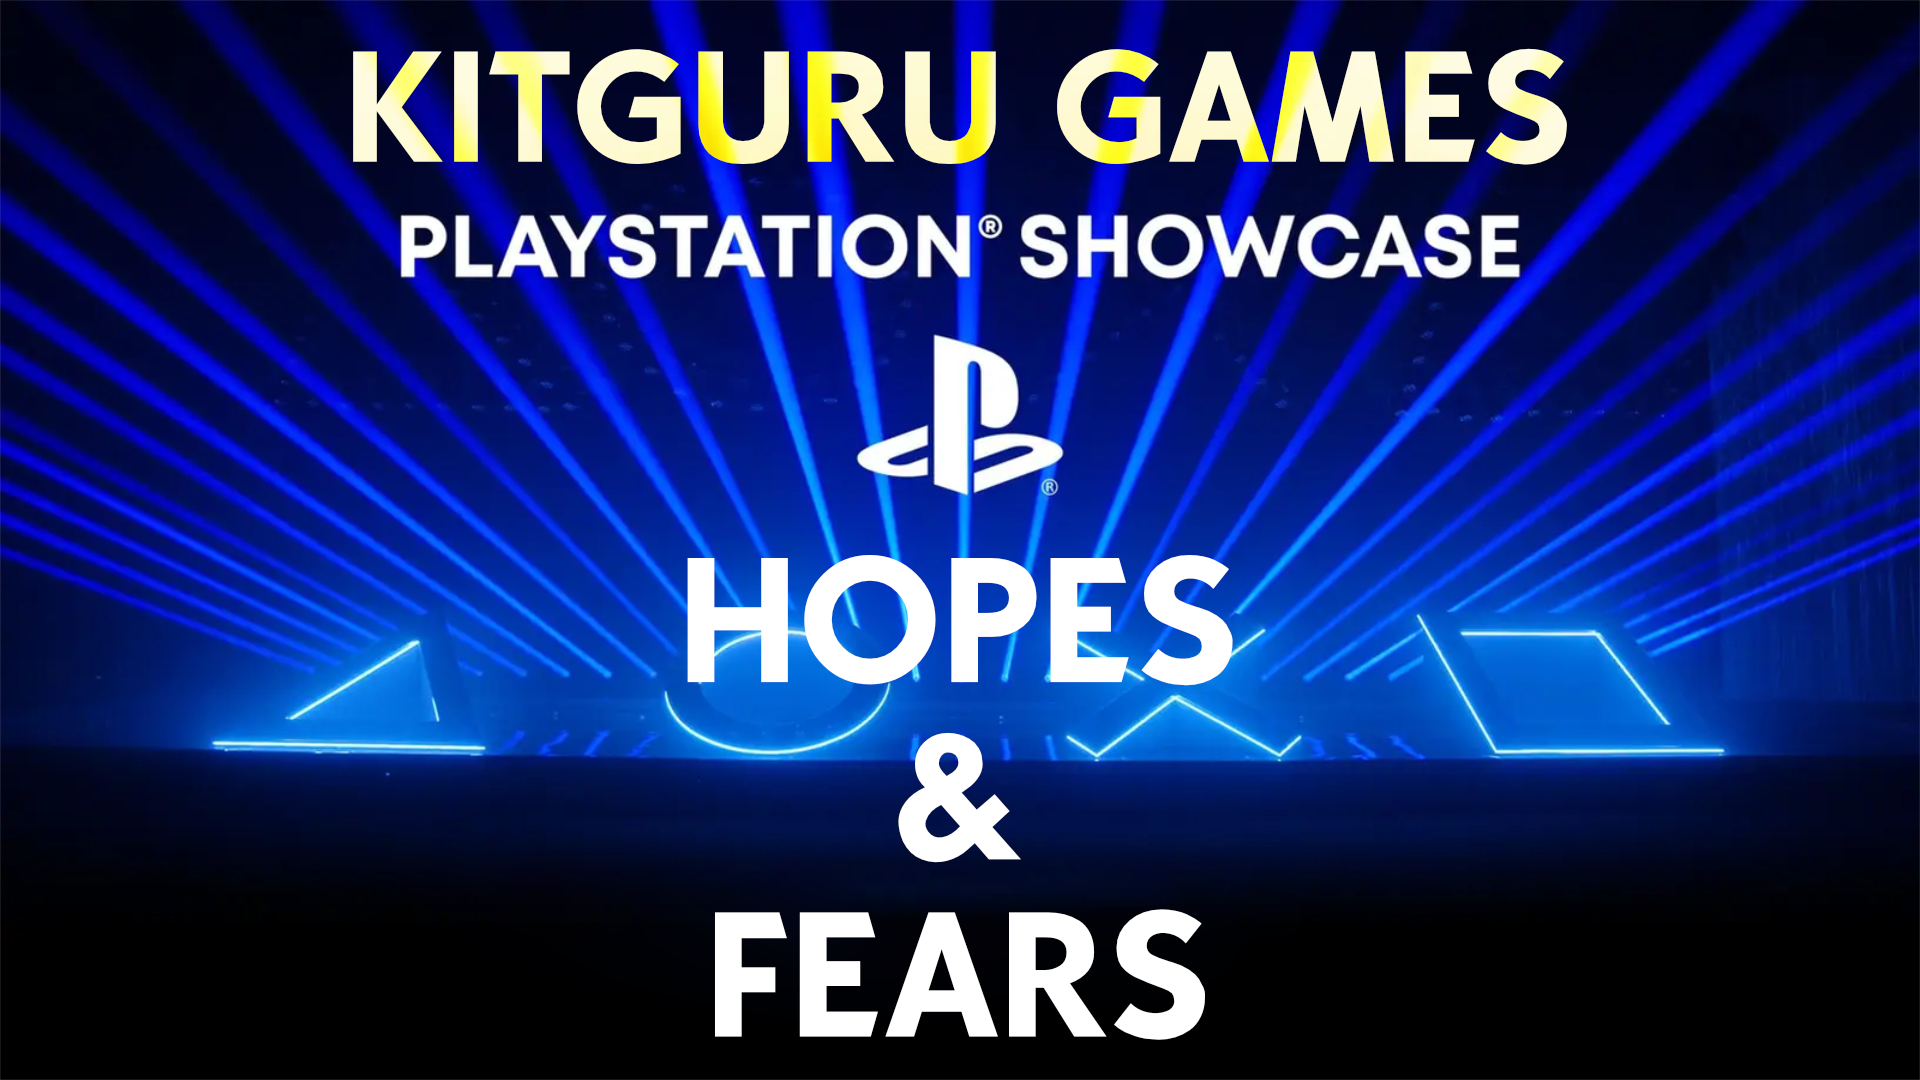 THE 2023 PLAYSTATION SHOWCASE IS COMING! WHAT WILL WE SEE?